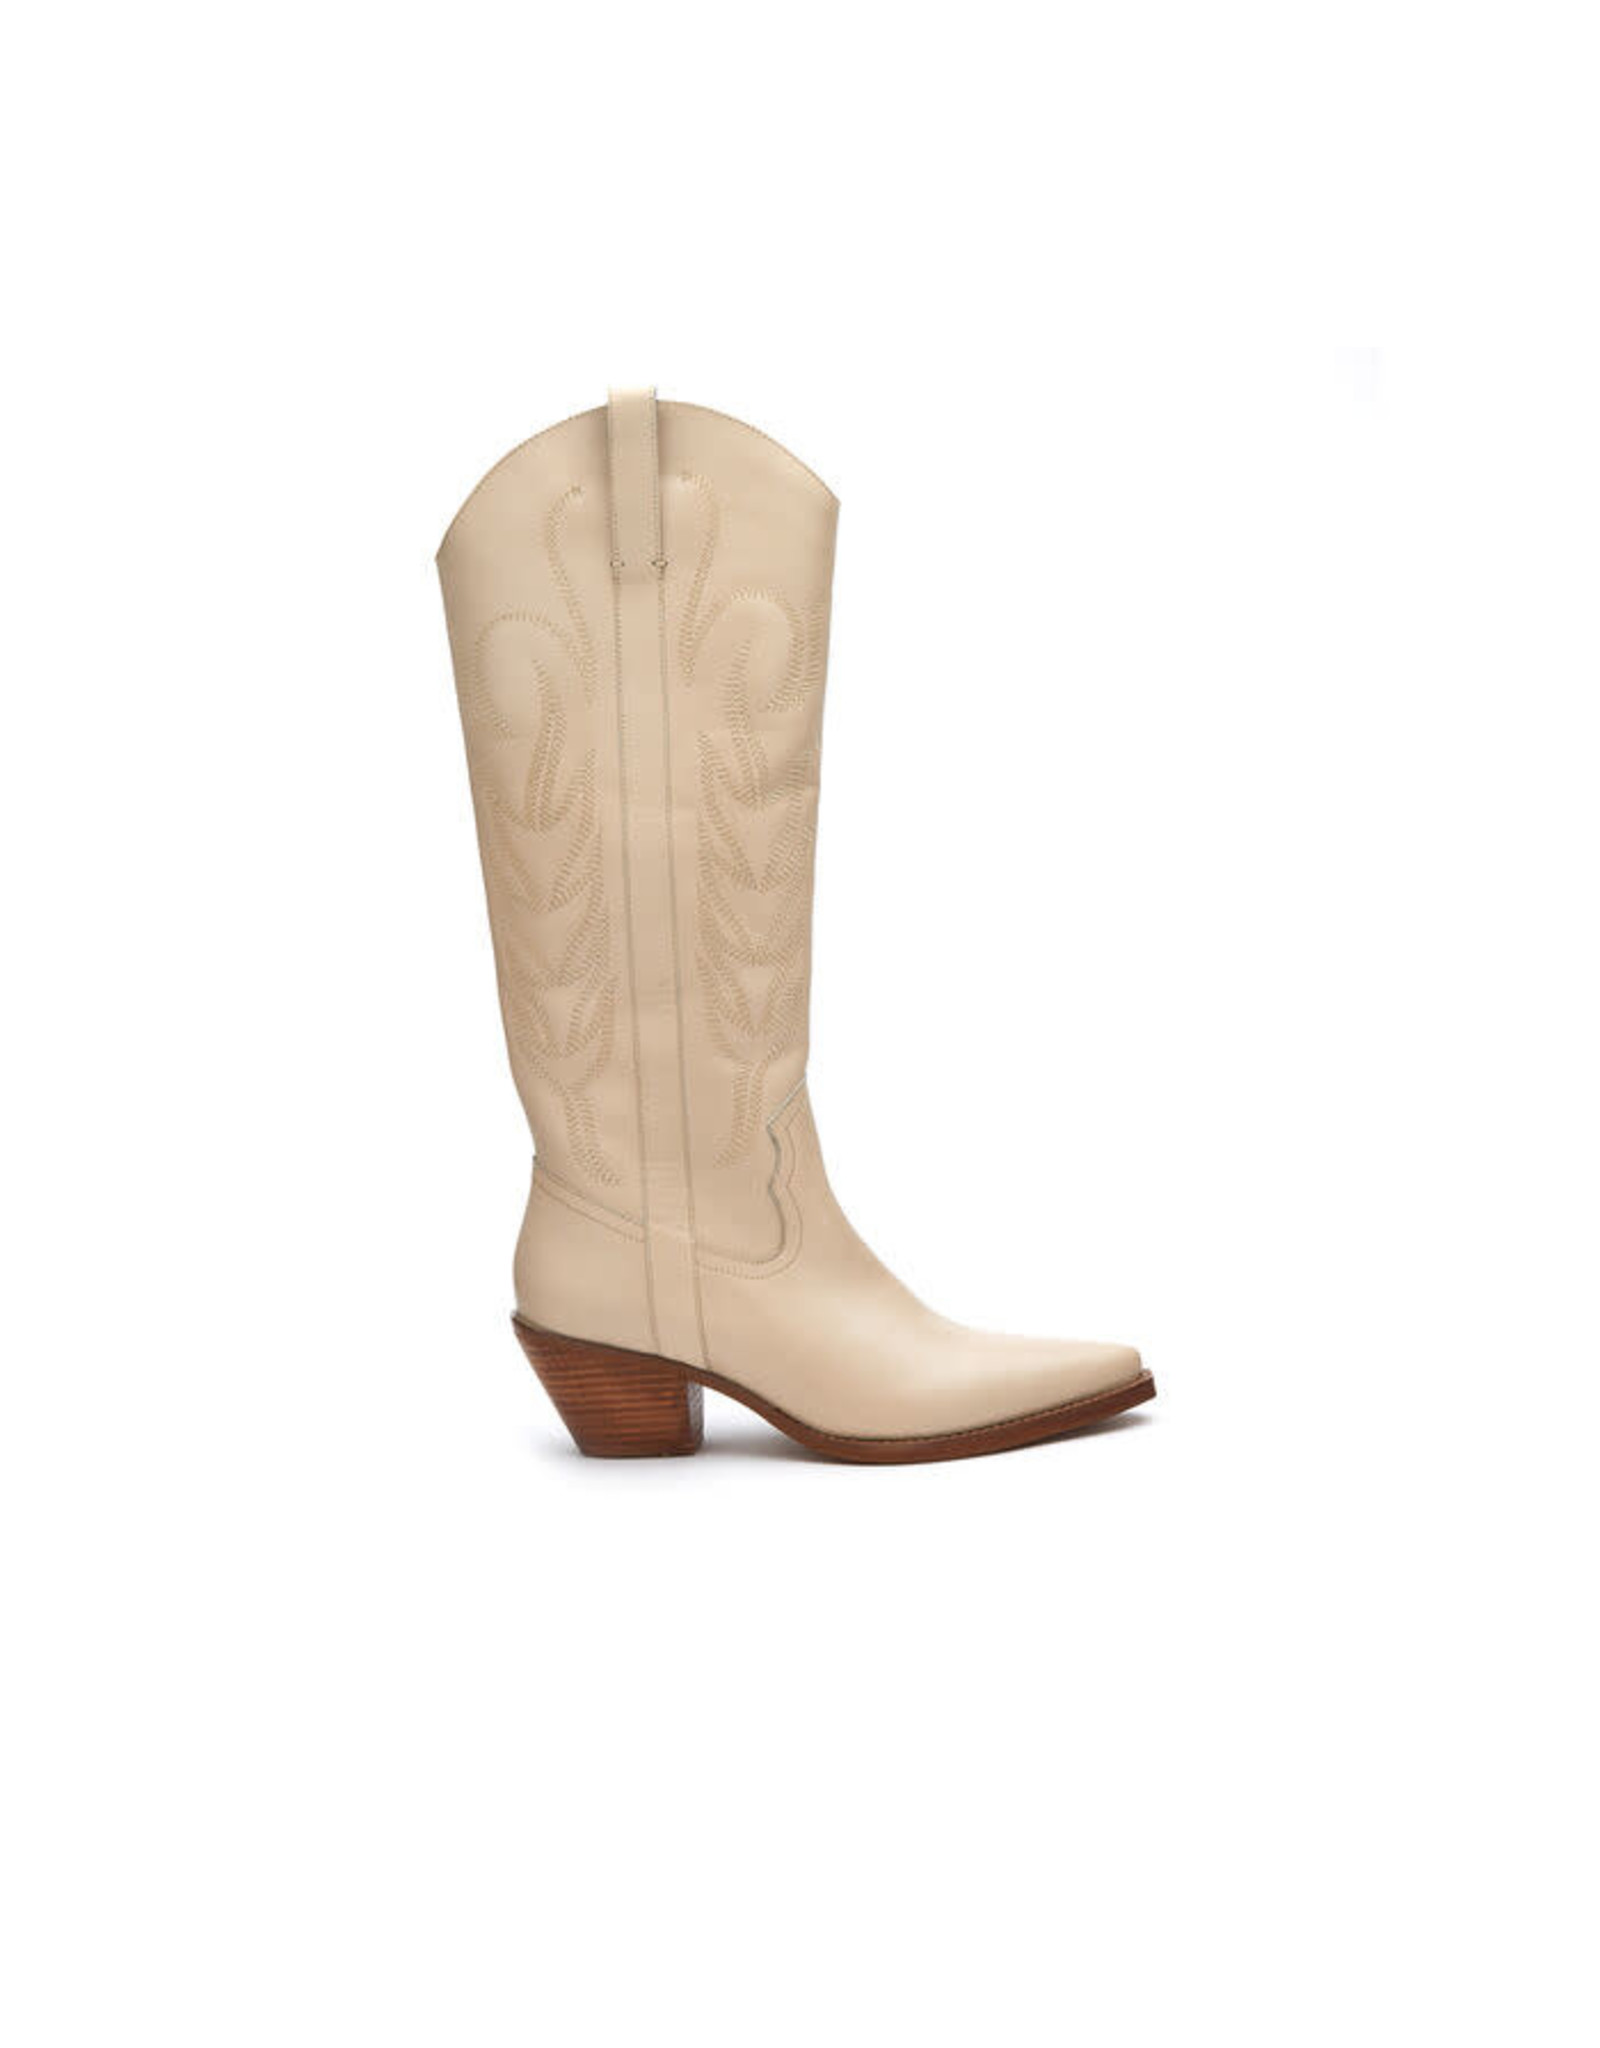 Matisse Agency Ivory Tall Boots